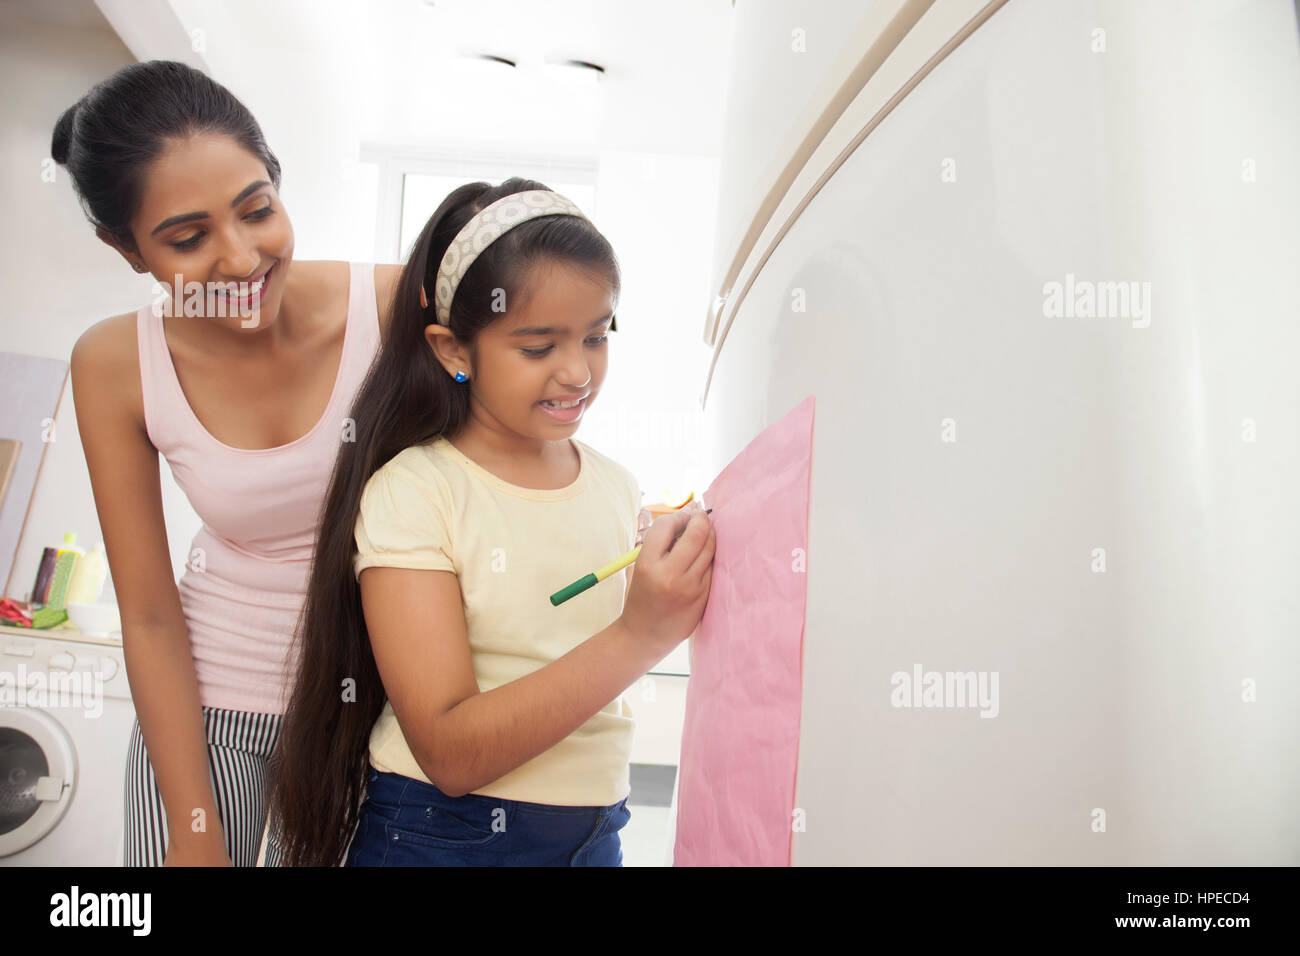 Mother looking at daughter writing note on refrigerator Stock Photo